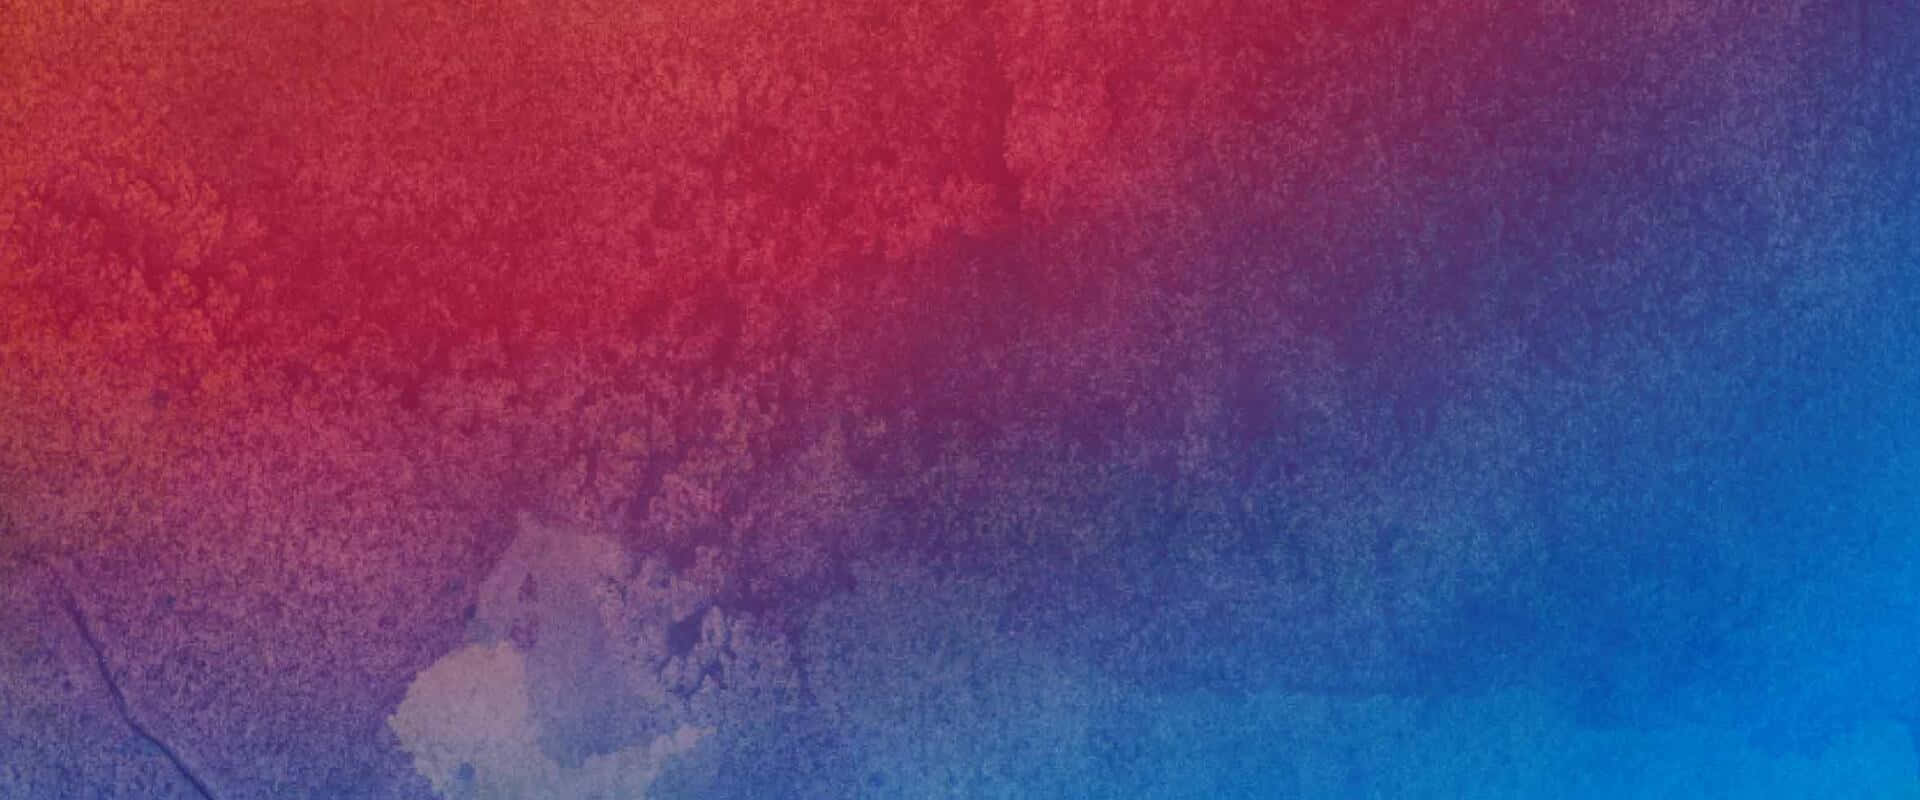 Coherent Blue Violet And Red Watercolor Wallpaper